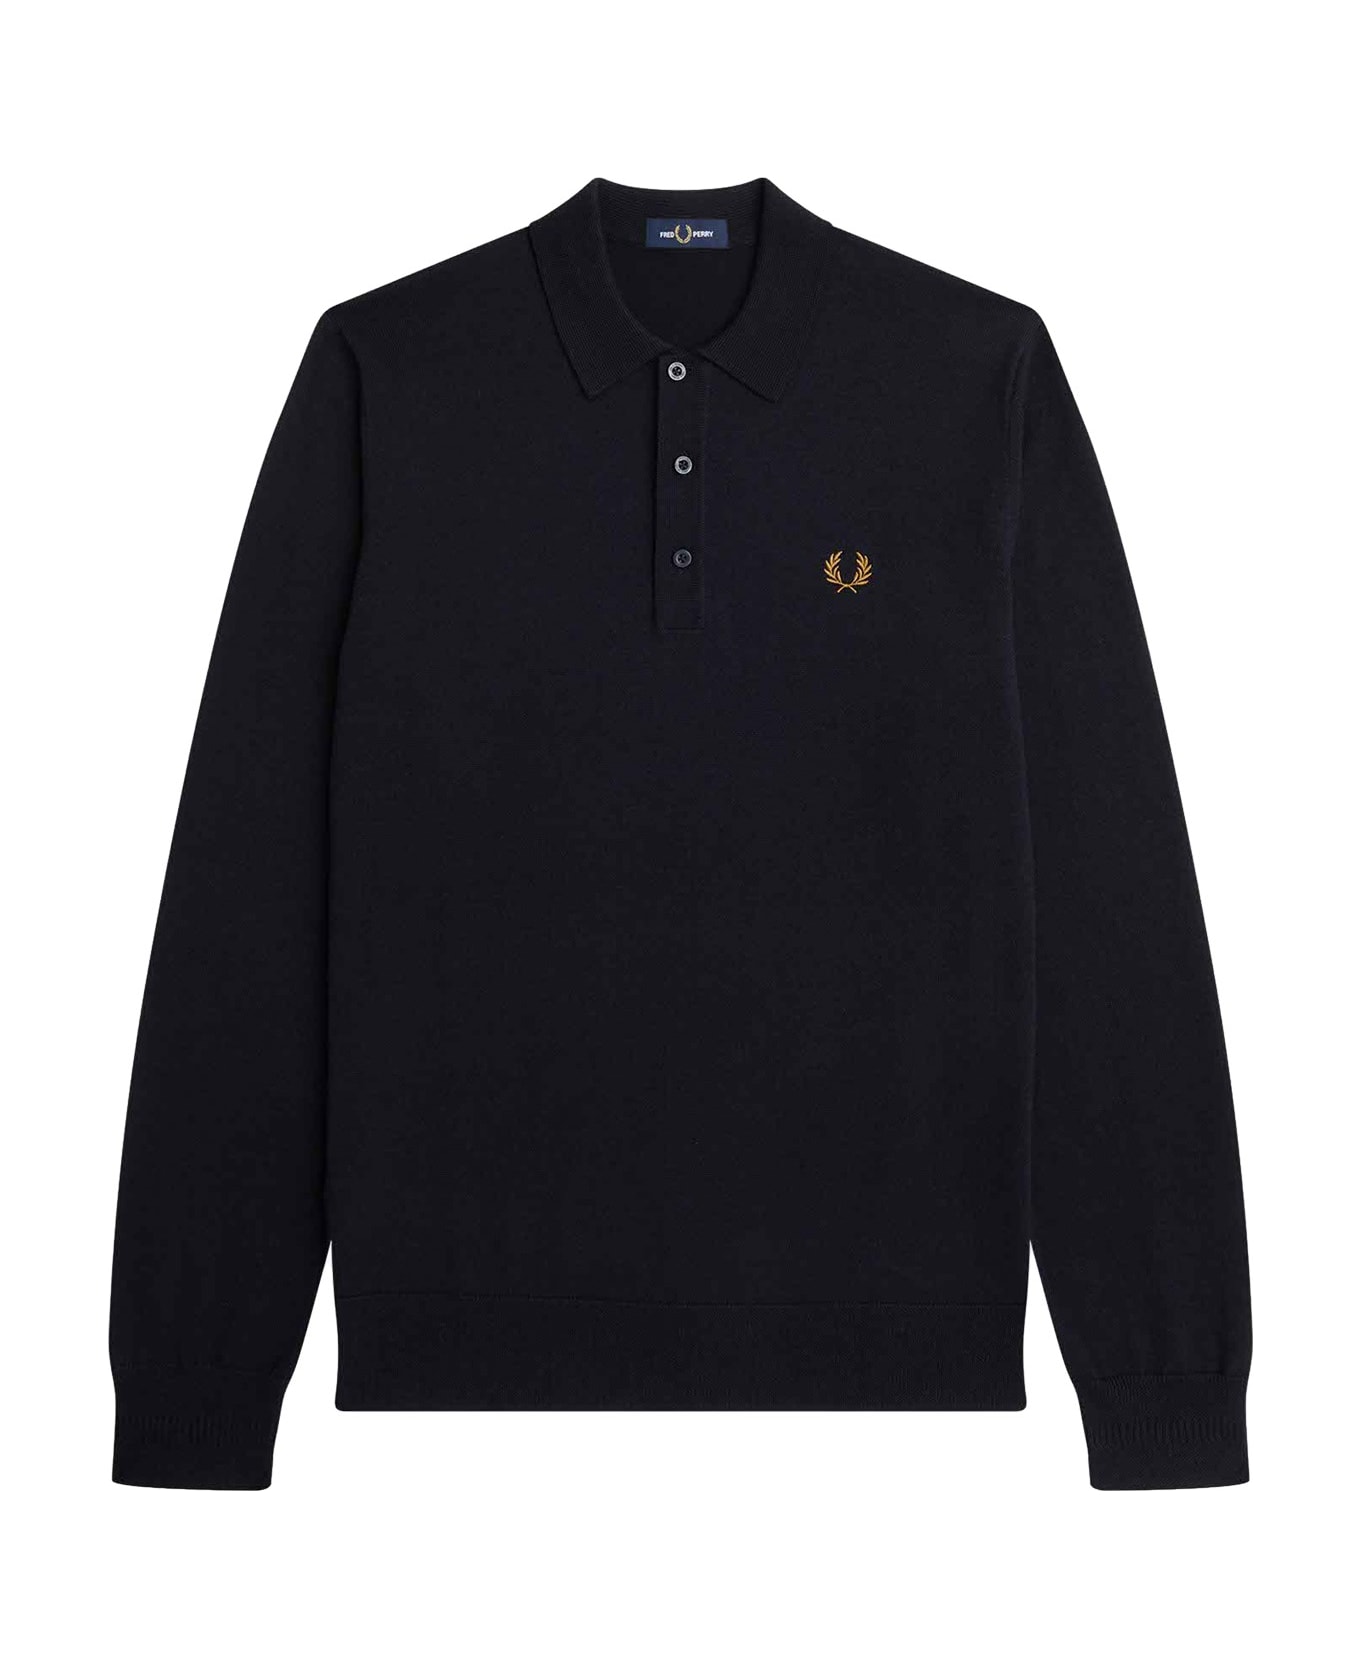 Fred Perry Classic Polo. - BLU